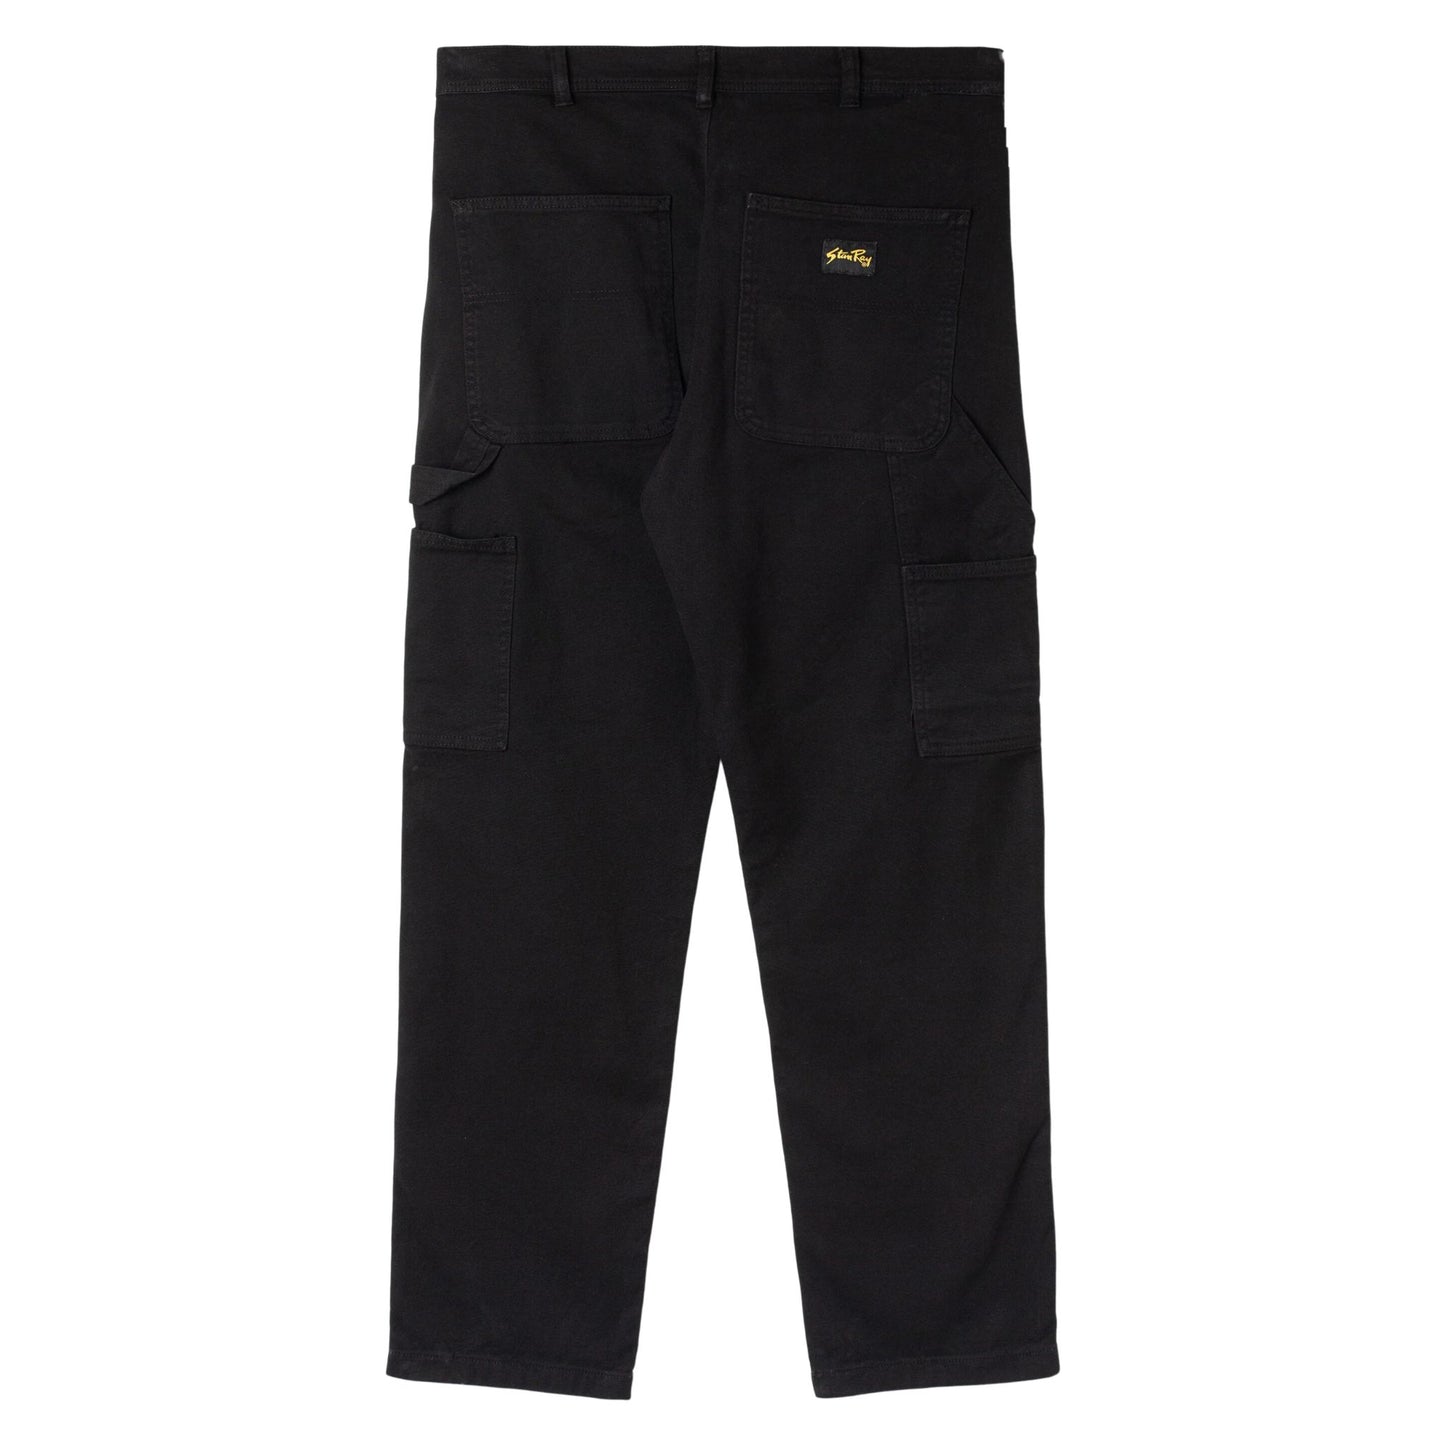 STAN RAY - 80s Painter Pant Black Duck